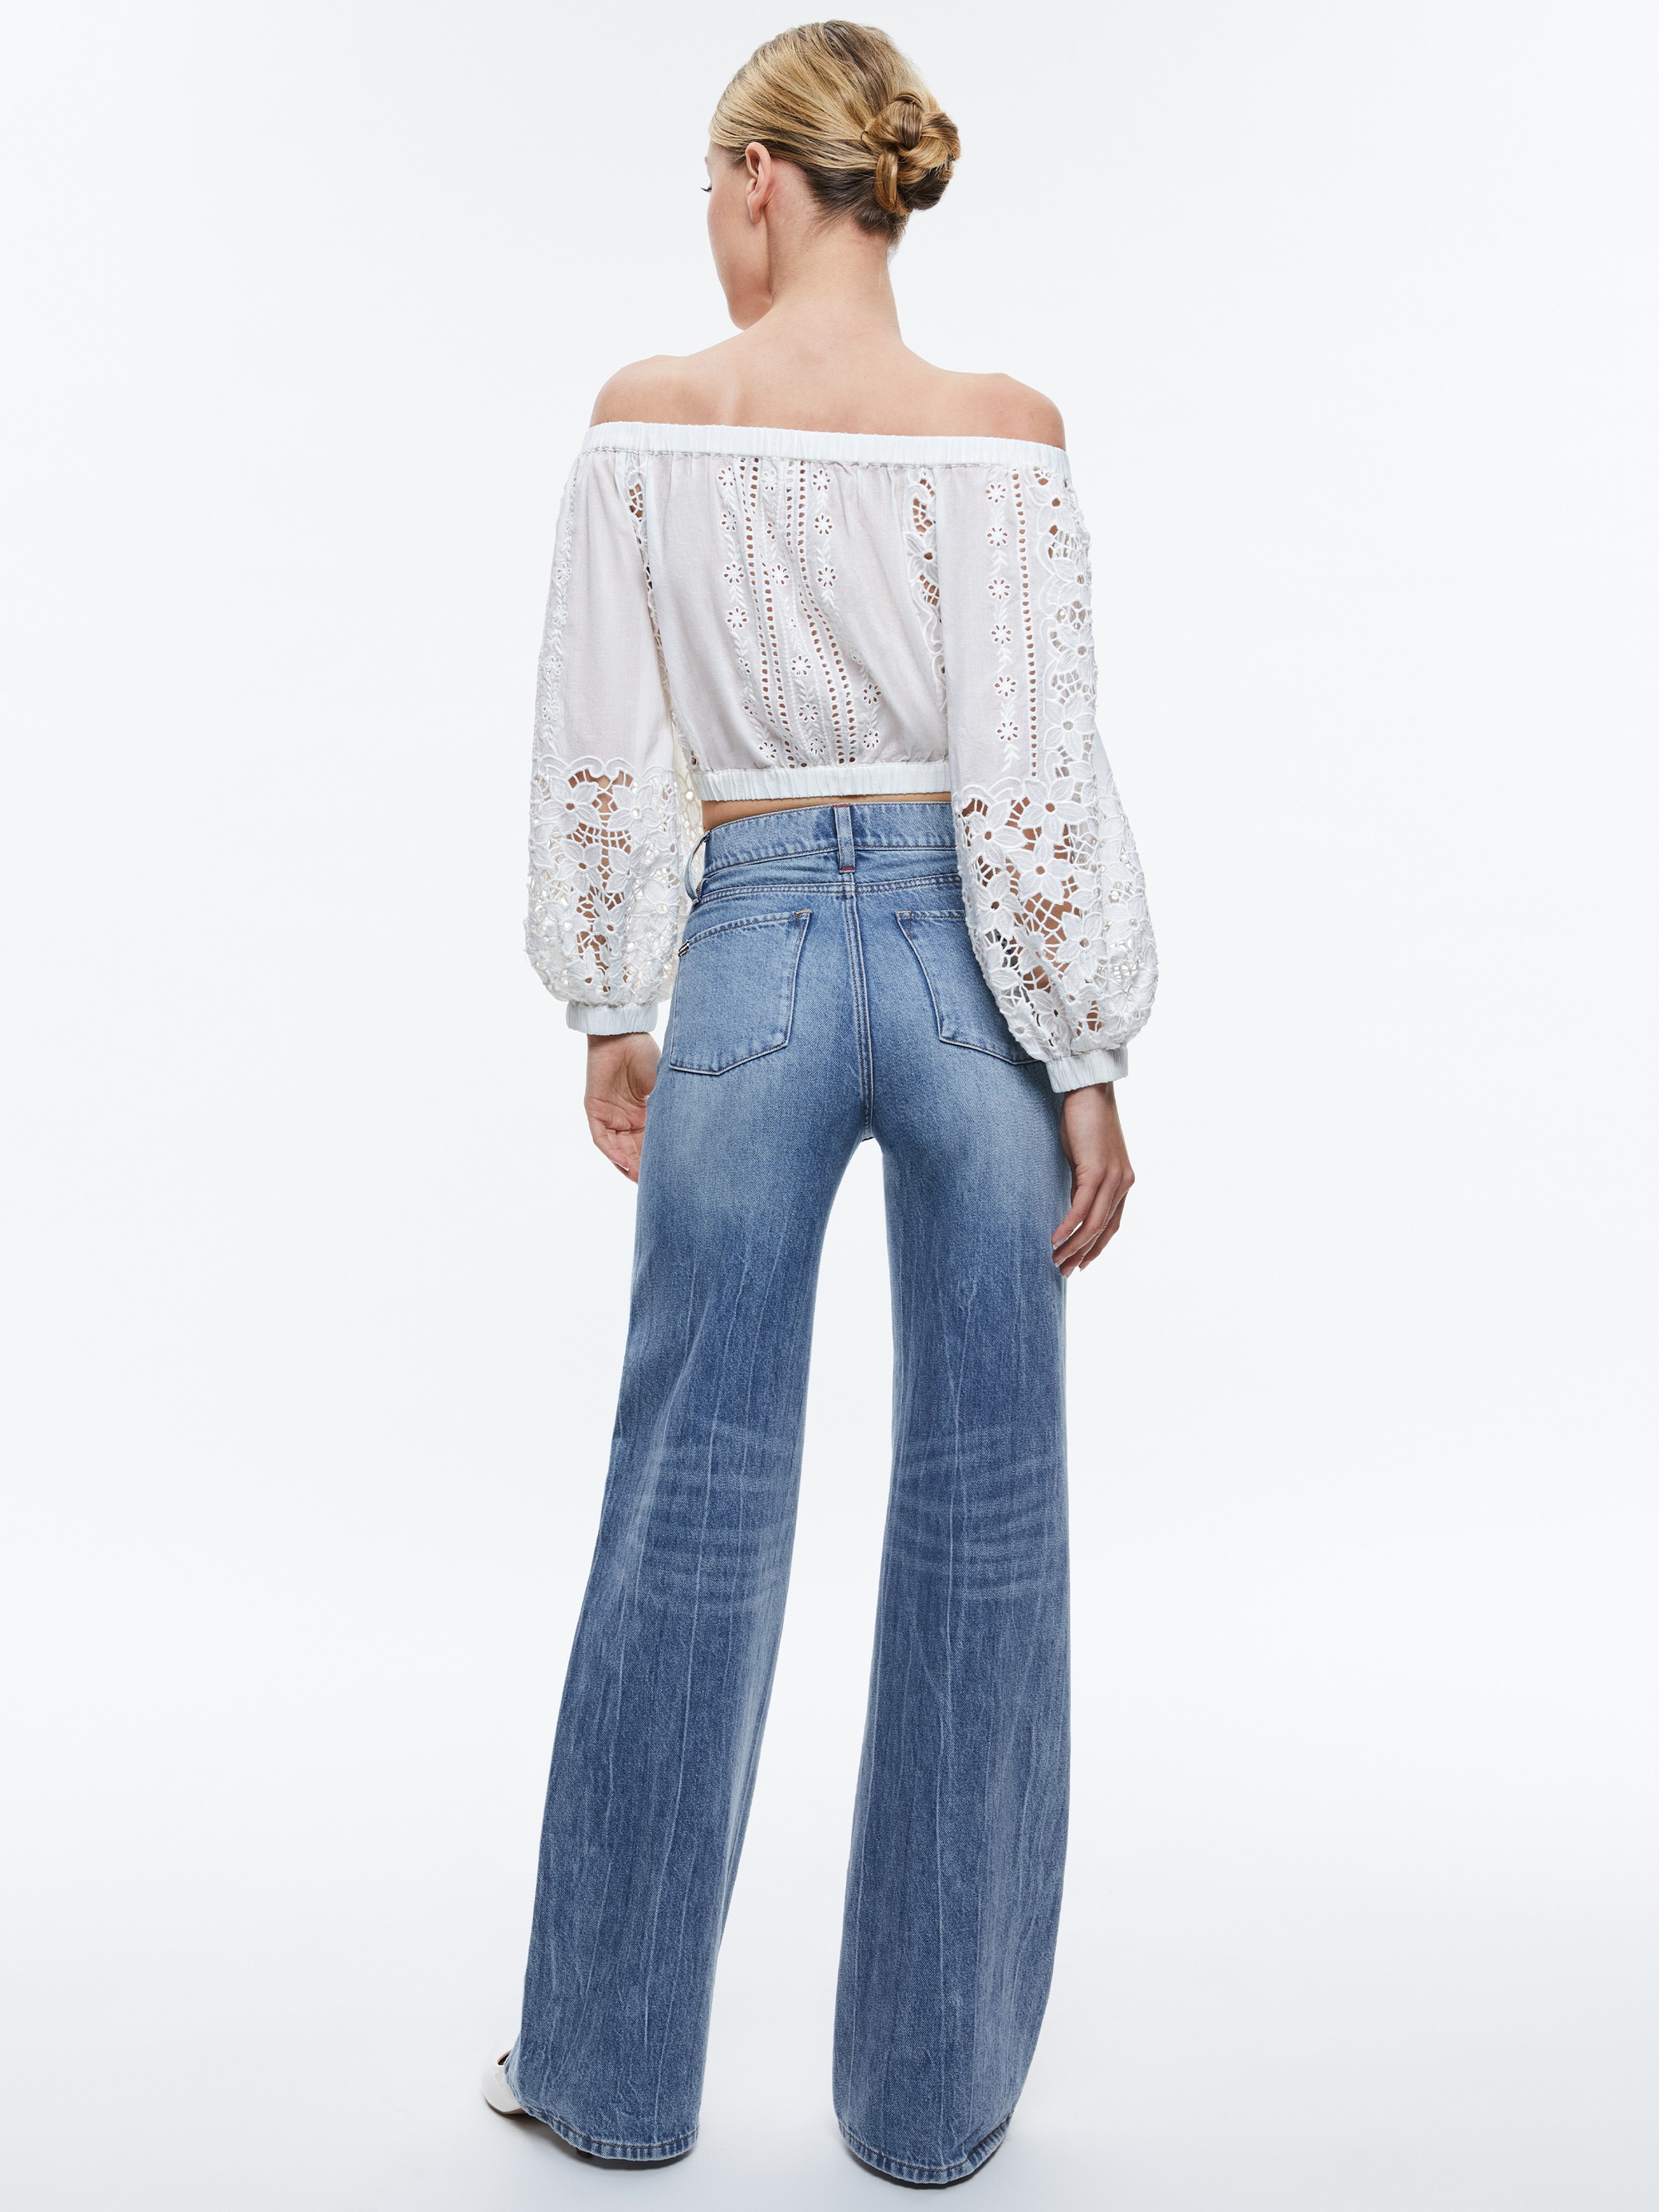 IVY OFF THE SHOULDER CROPPED TOP - 4